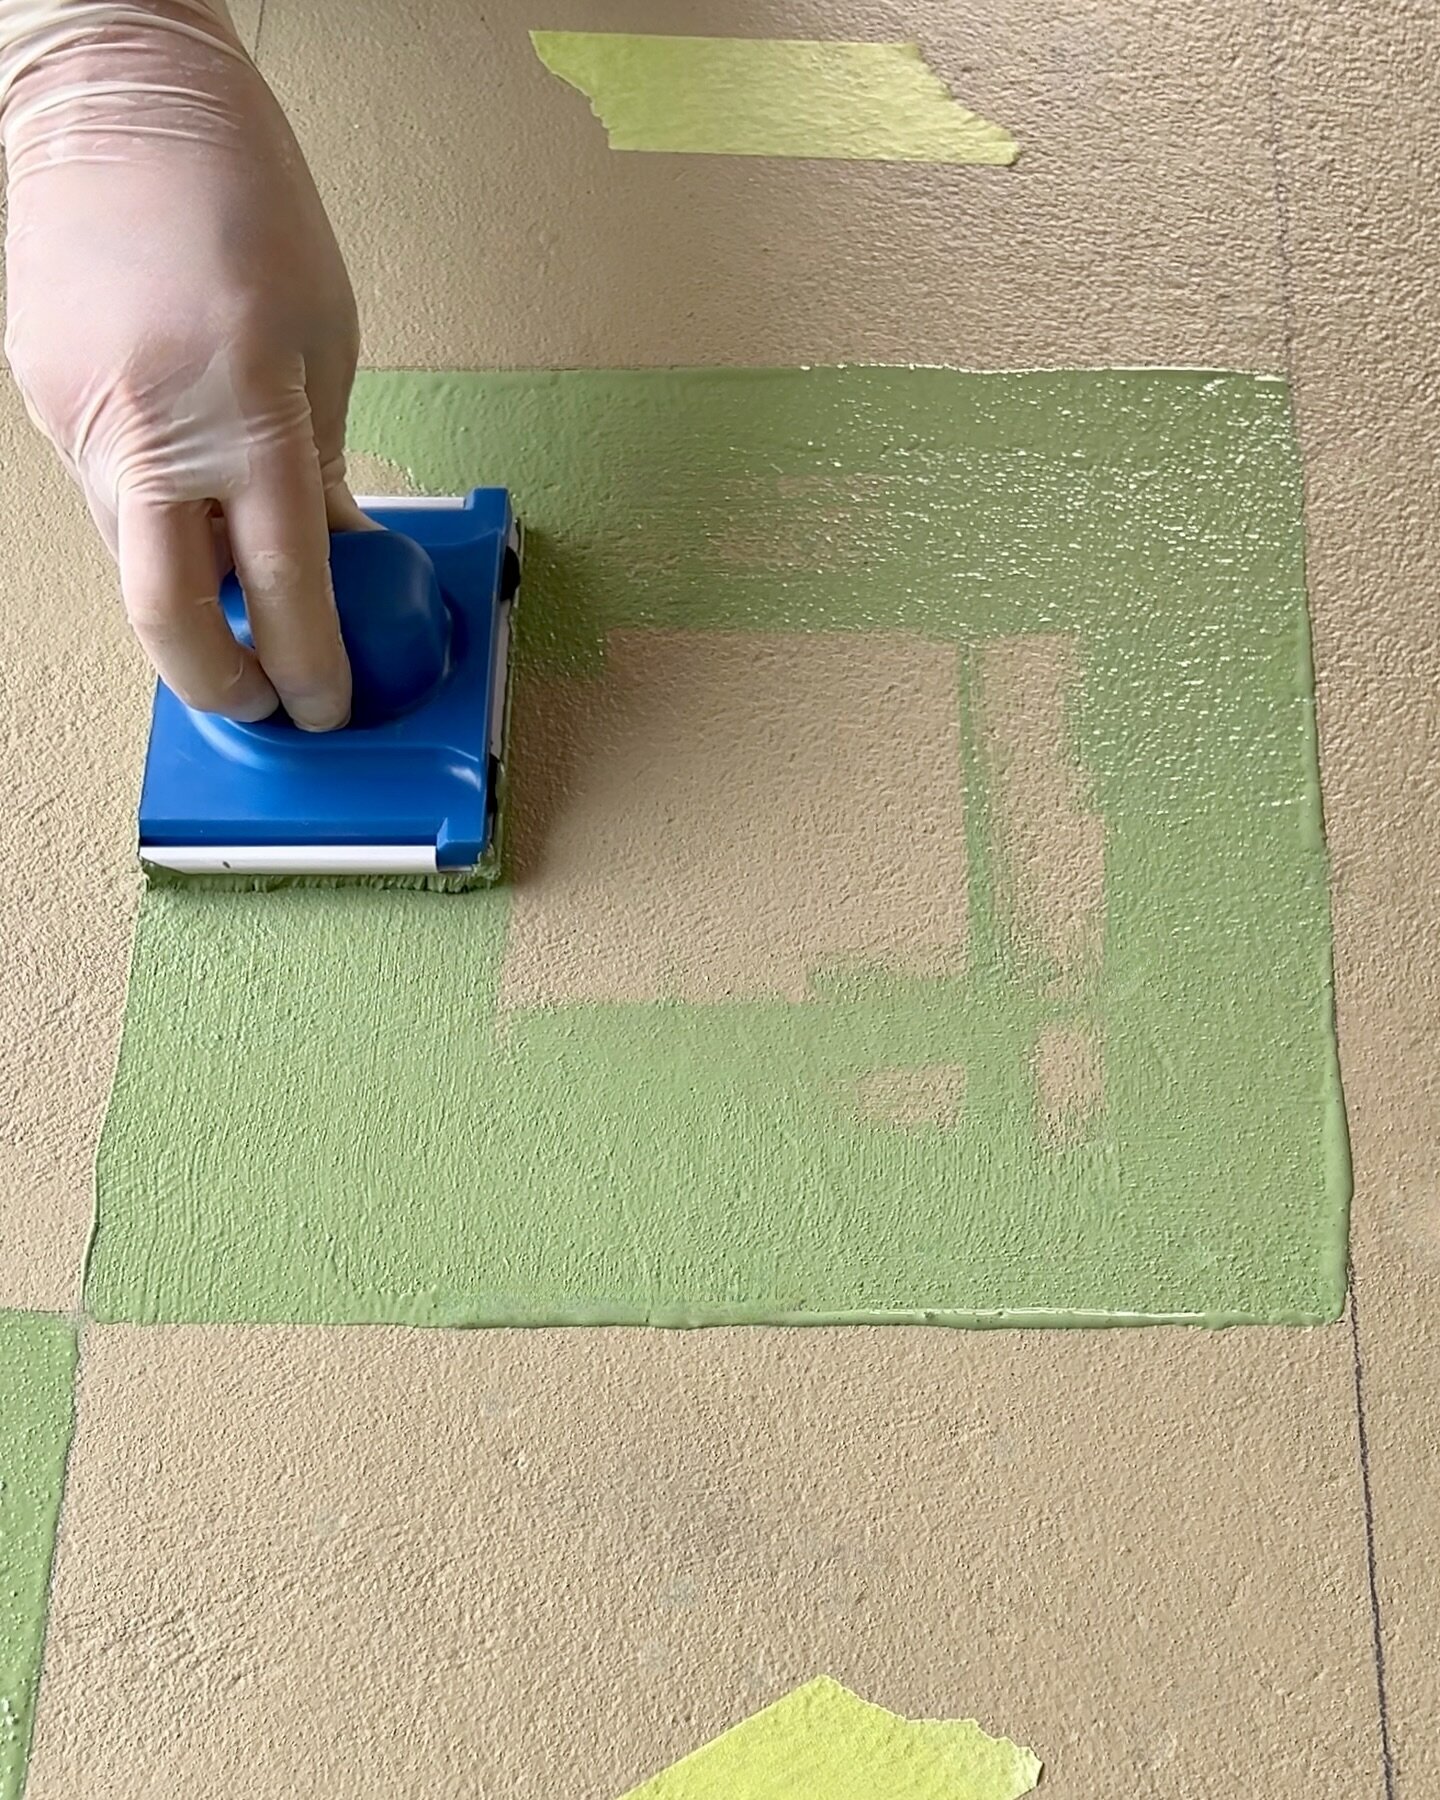 My #DIYtip for painting repetitive squares without using masking tape is to find a tool to help paint straight lines. I used an edger with a foam pad. ⁠
👉🏼 Did you see how I transformed the concrete floor of my old carport with these green chequers